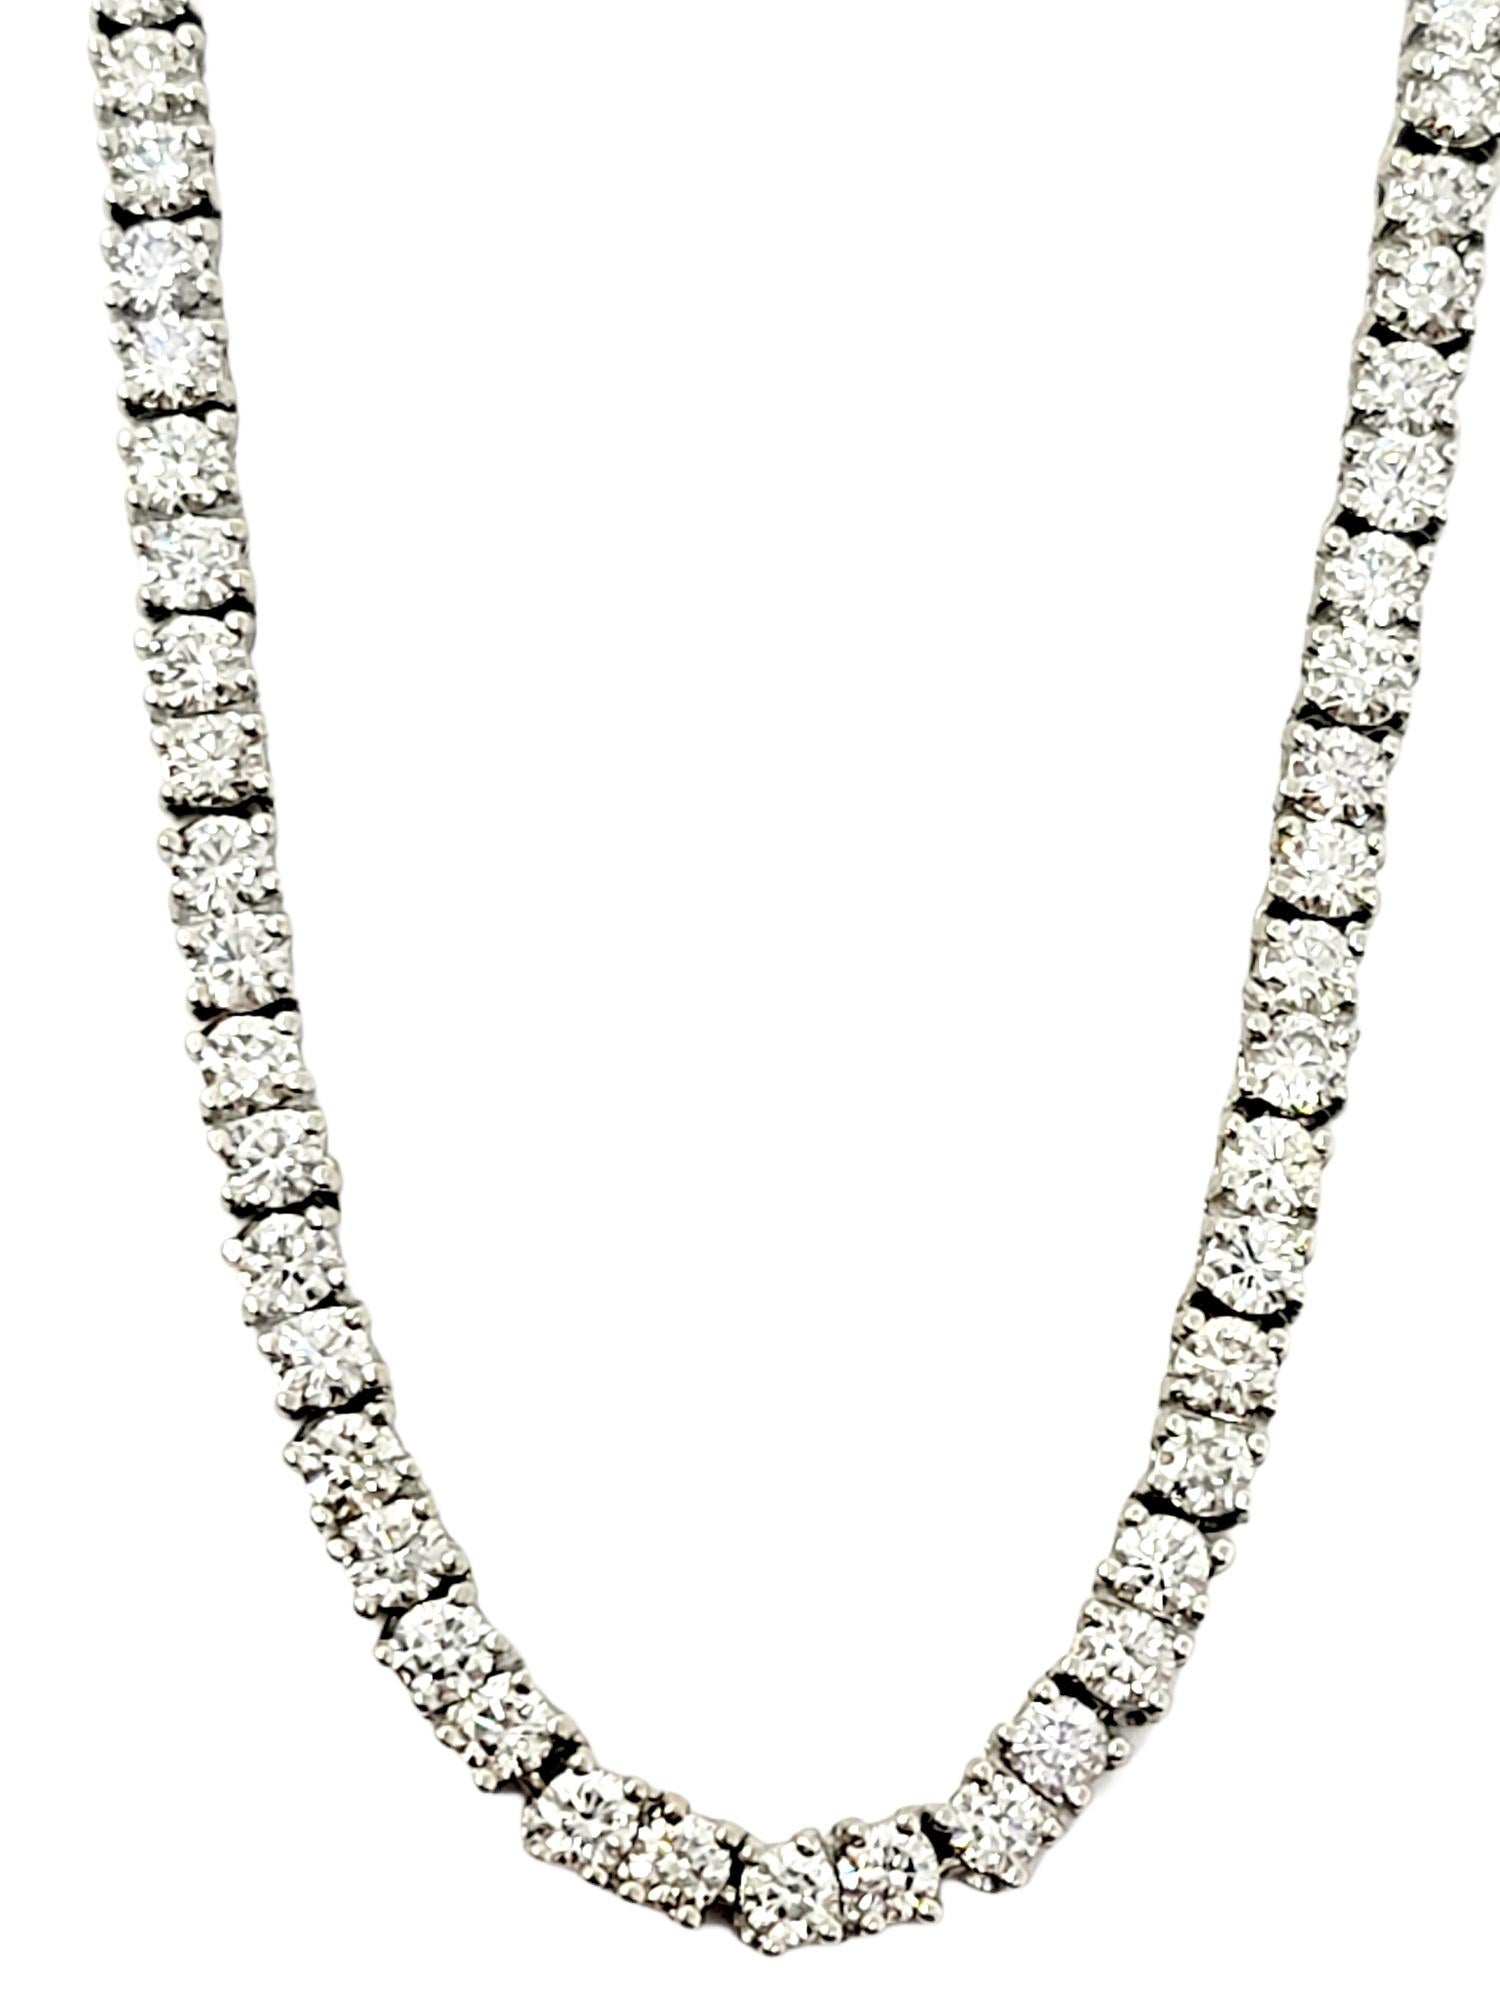 20.79 Carats Total Round Diamond Tennis Necklace 14 Karat White Gold In Good Condition For Sale In Scottsdale, AZ